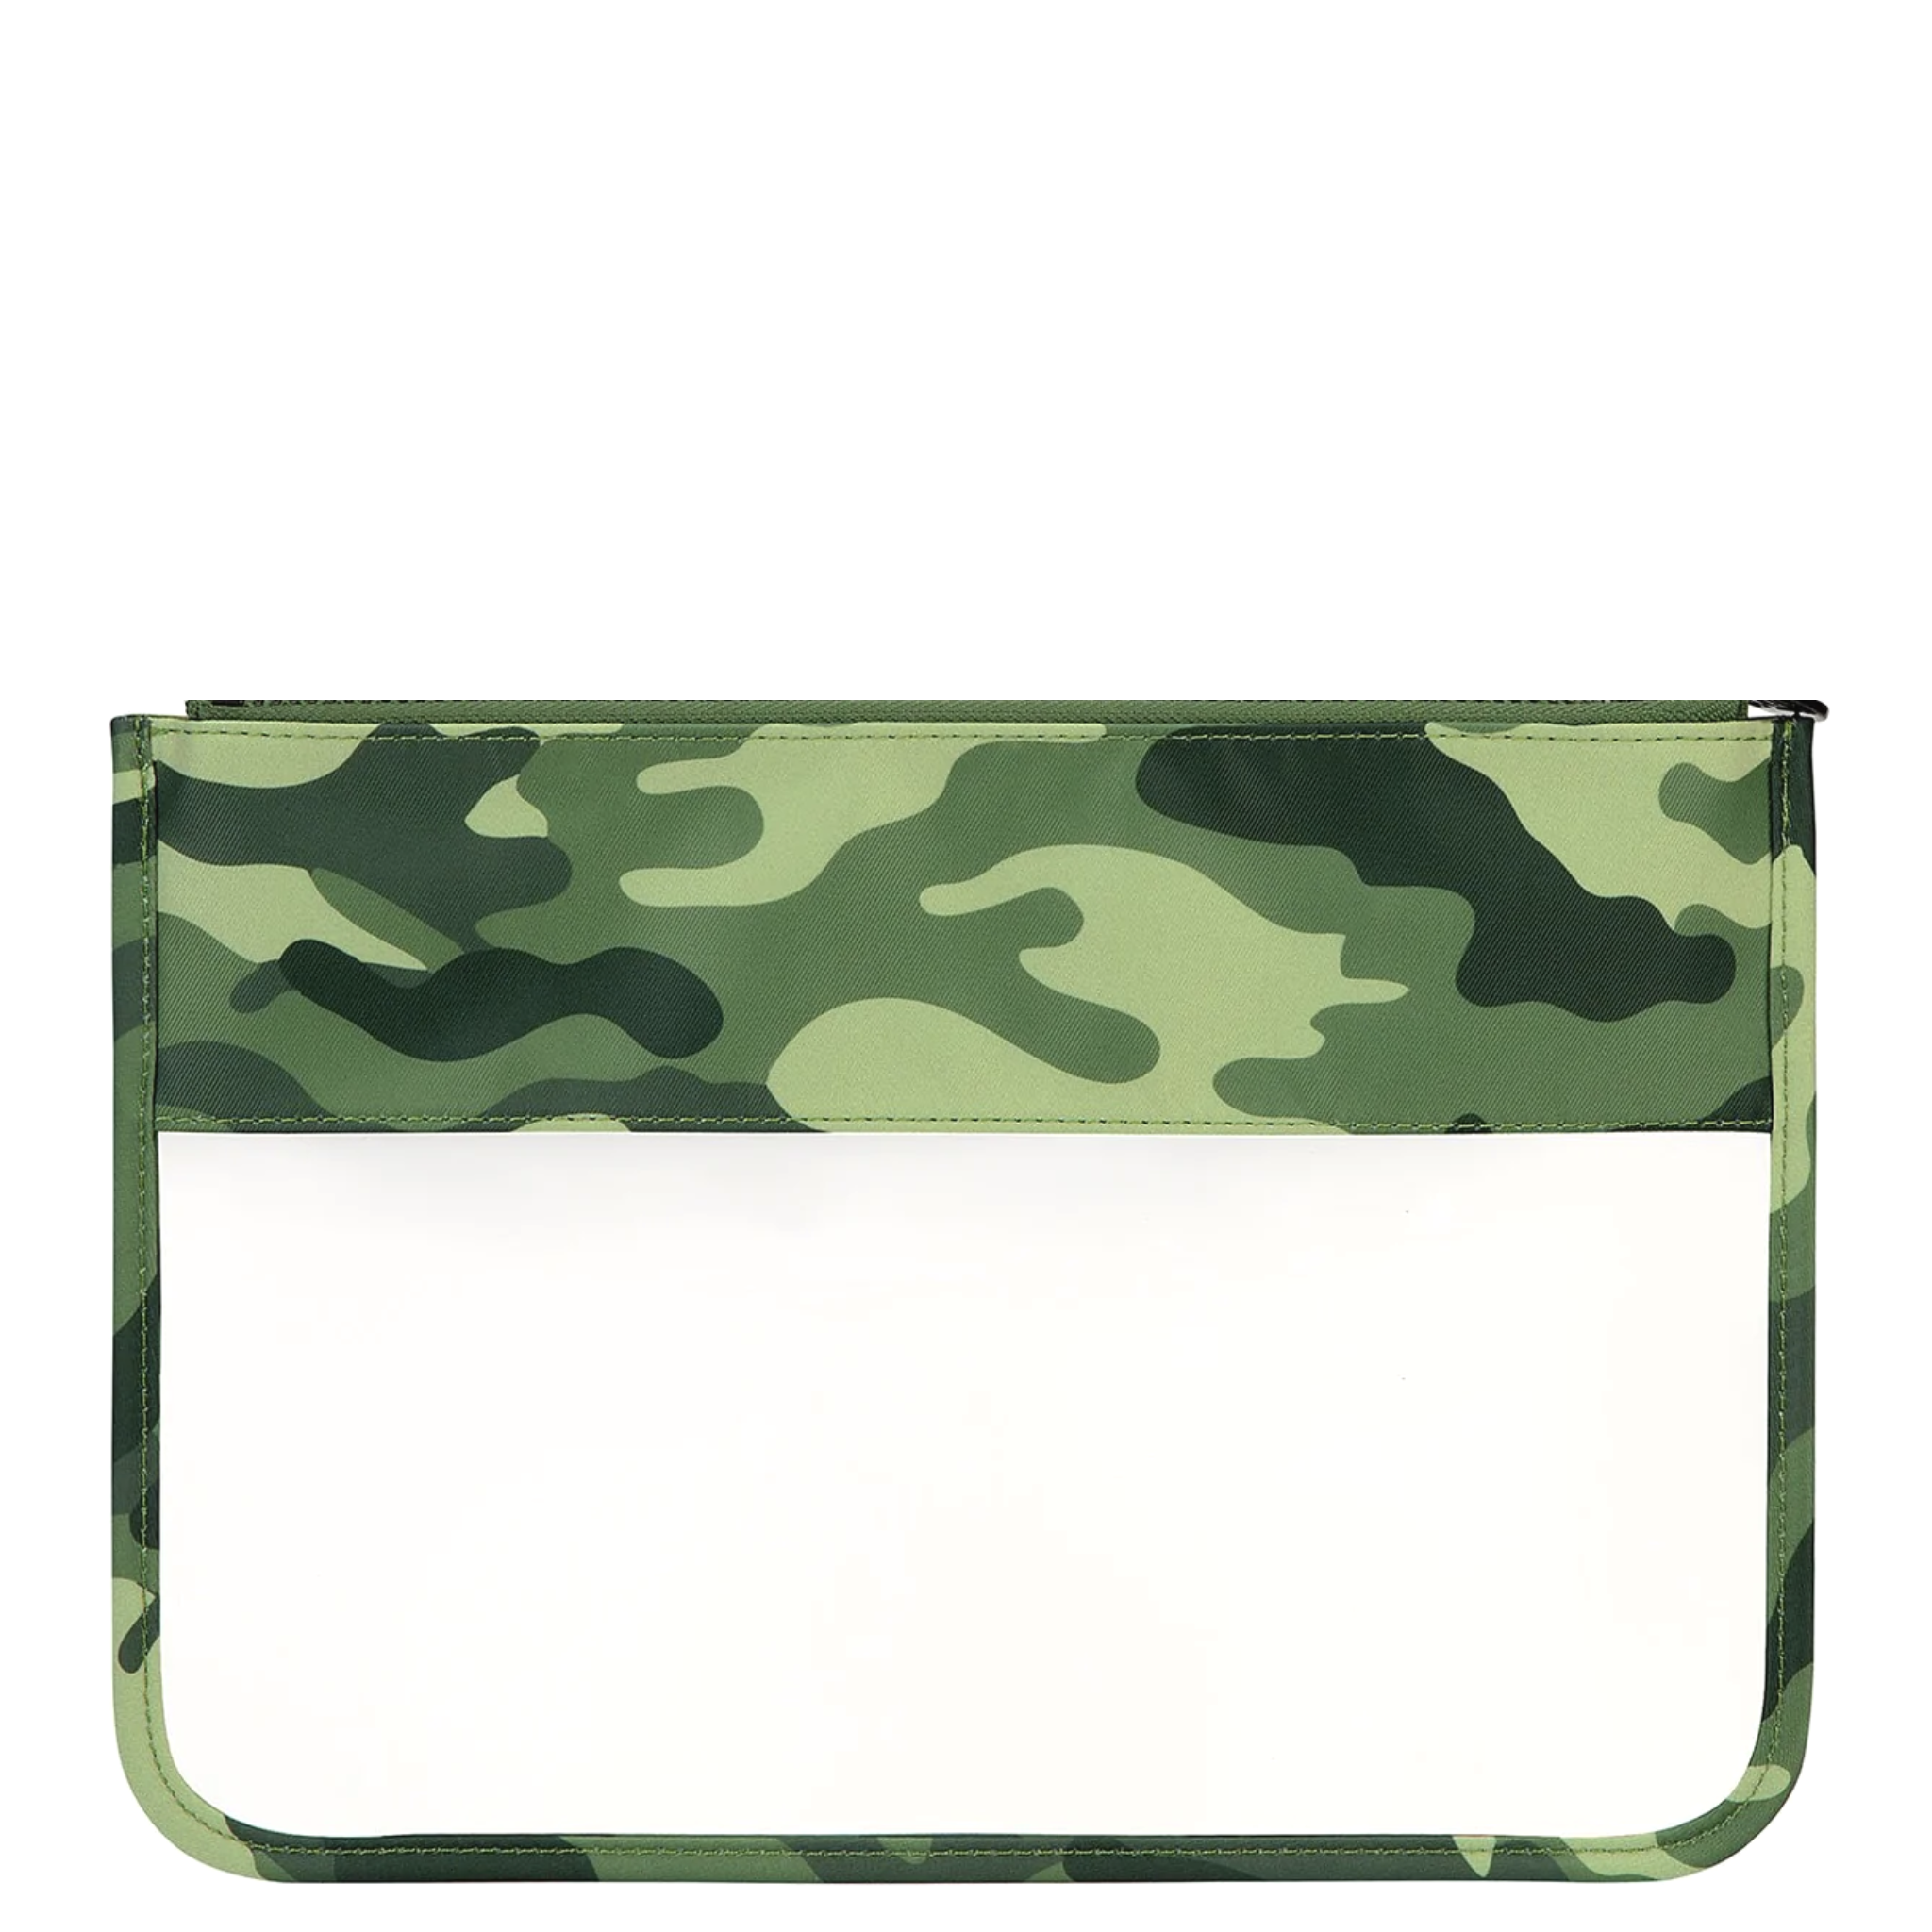 Small Clear Flat Nylon Pouch